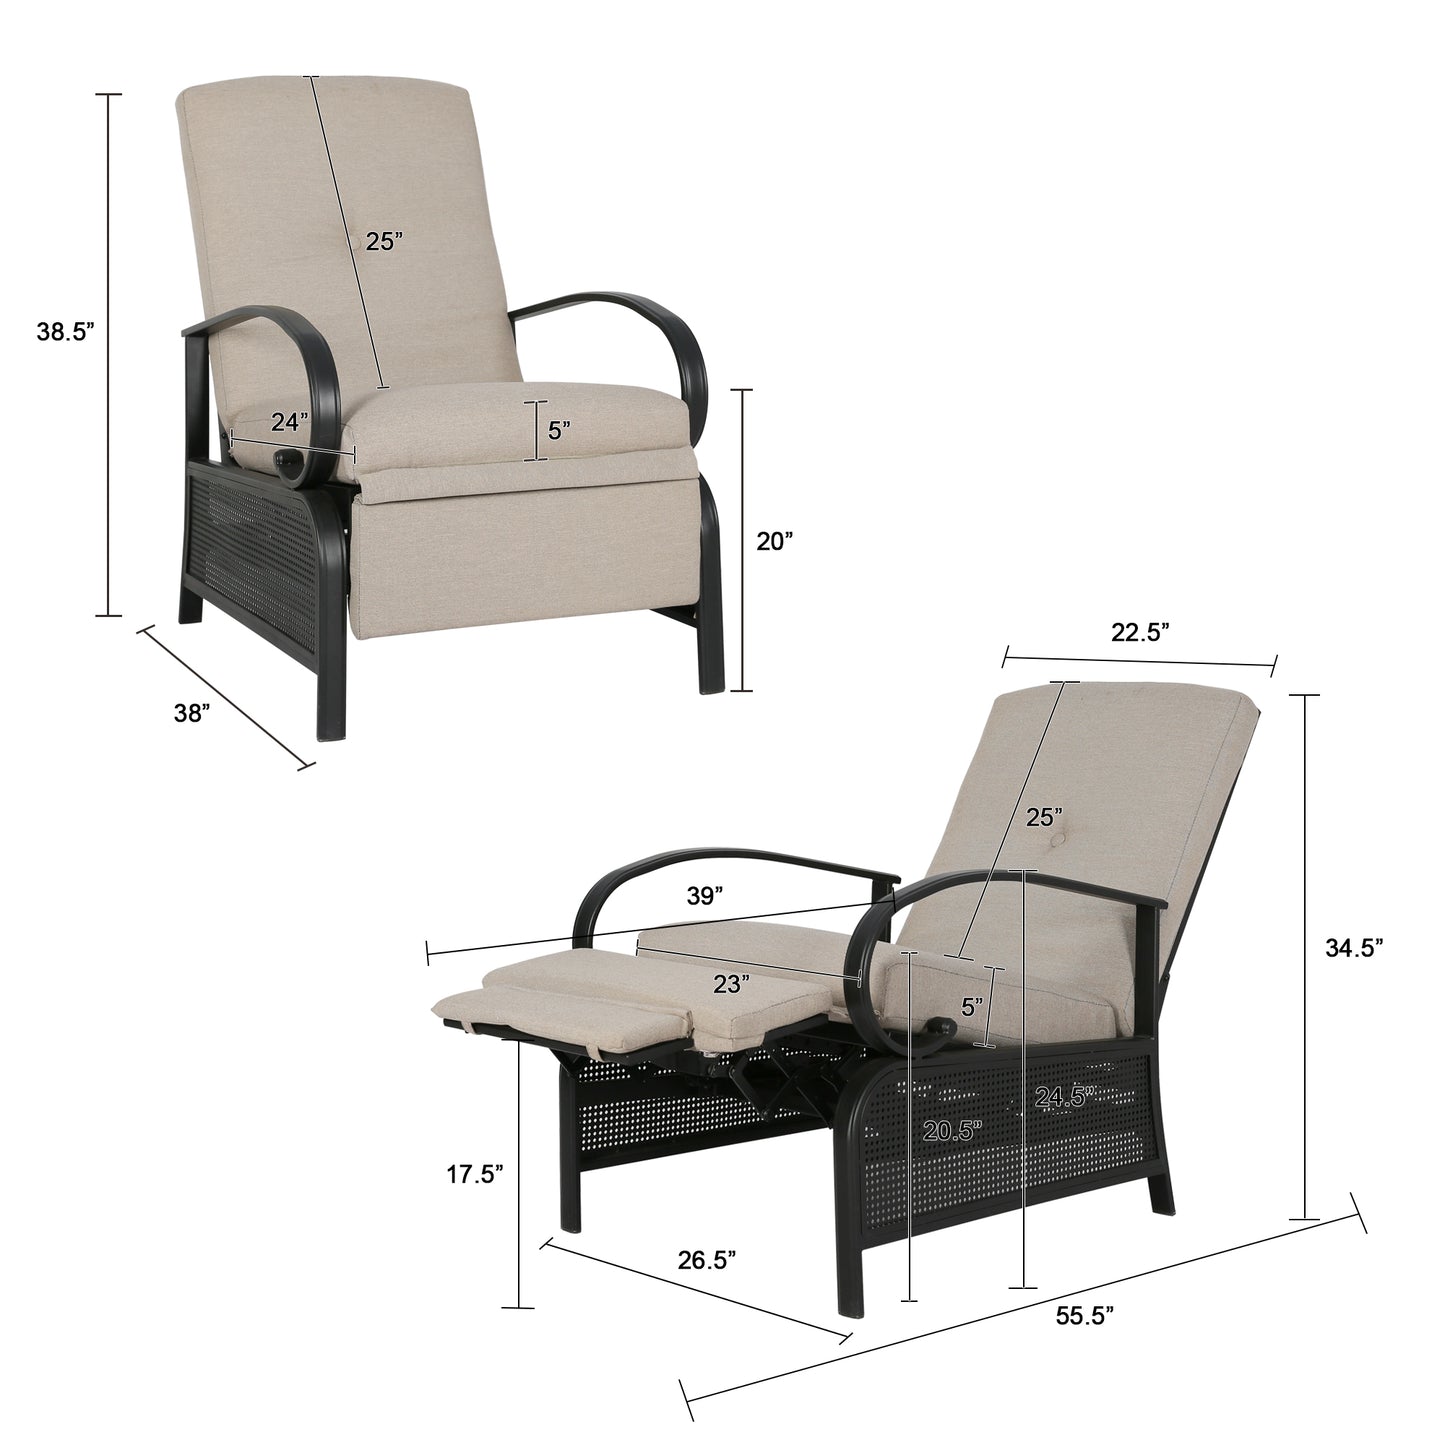 Patio Recliner Chair Automatic Adjustable Back Outdoor Lounge Recliner Chair with 100% Olefin Cushion (Sailcloth Beige)